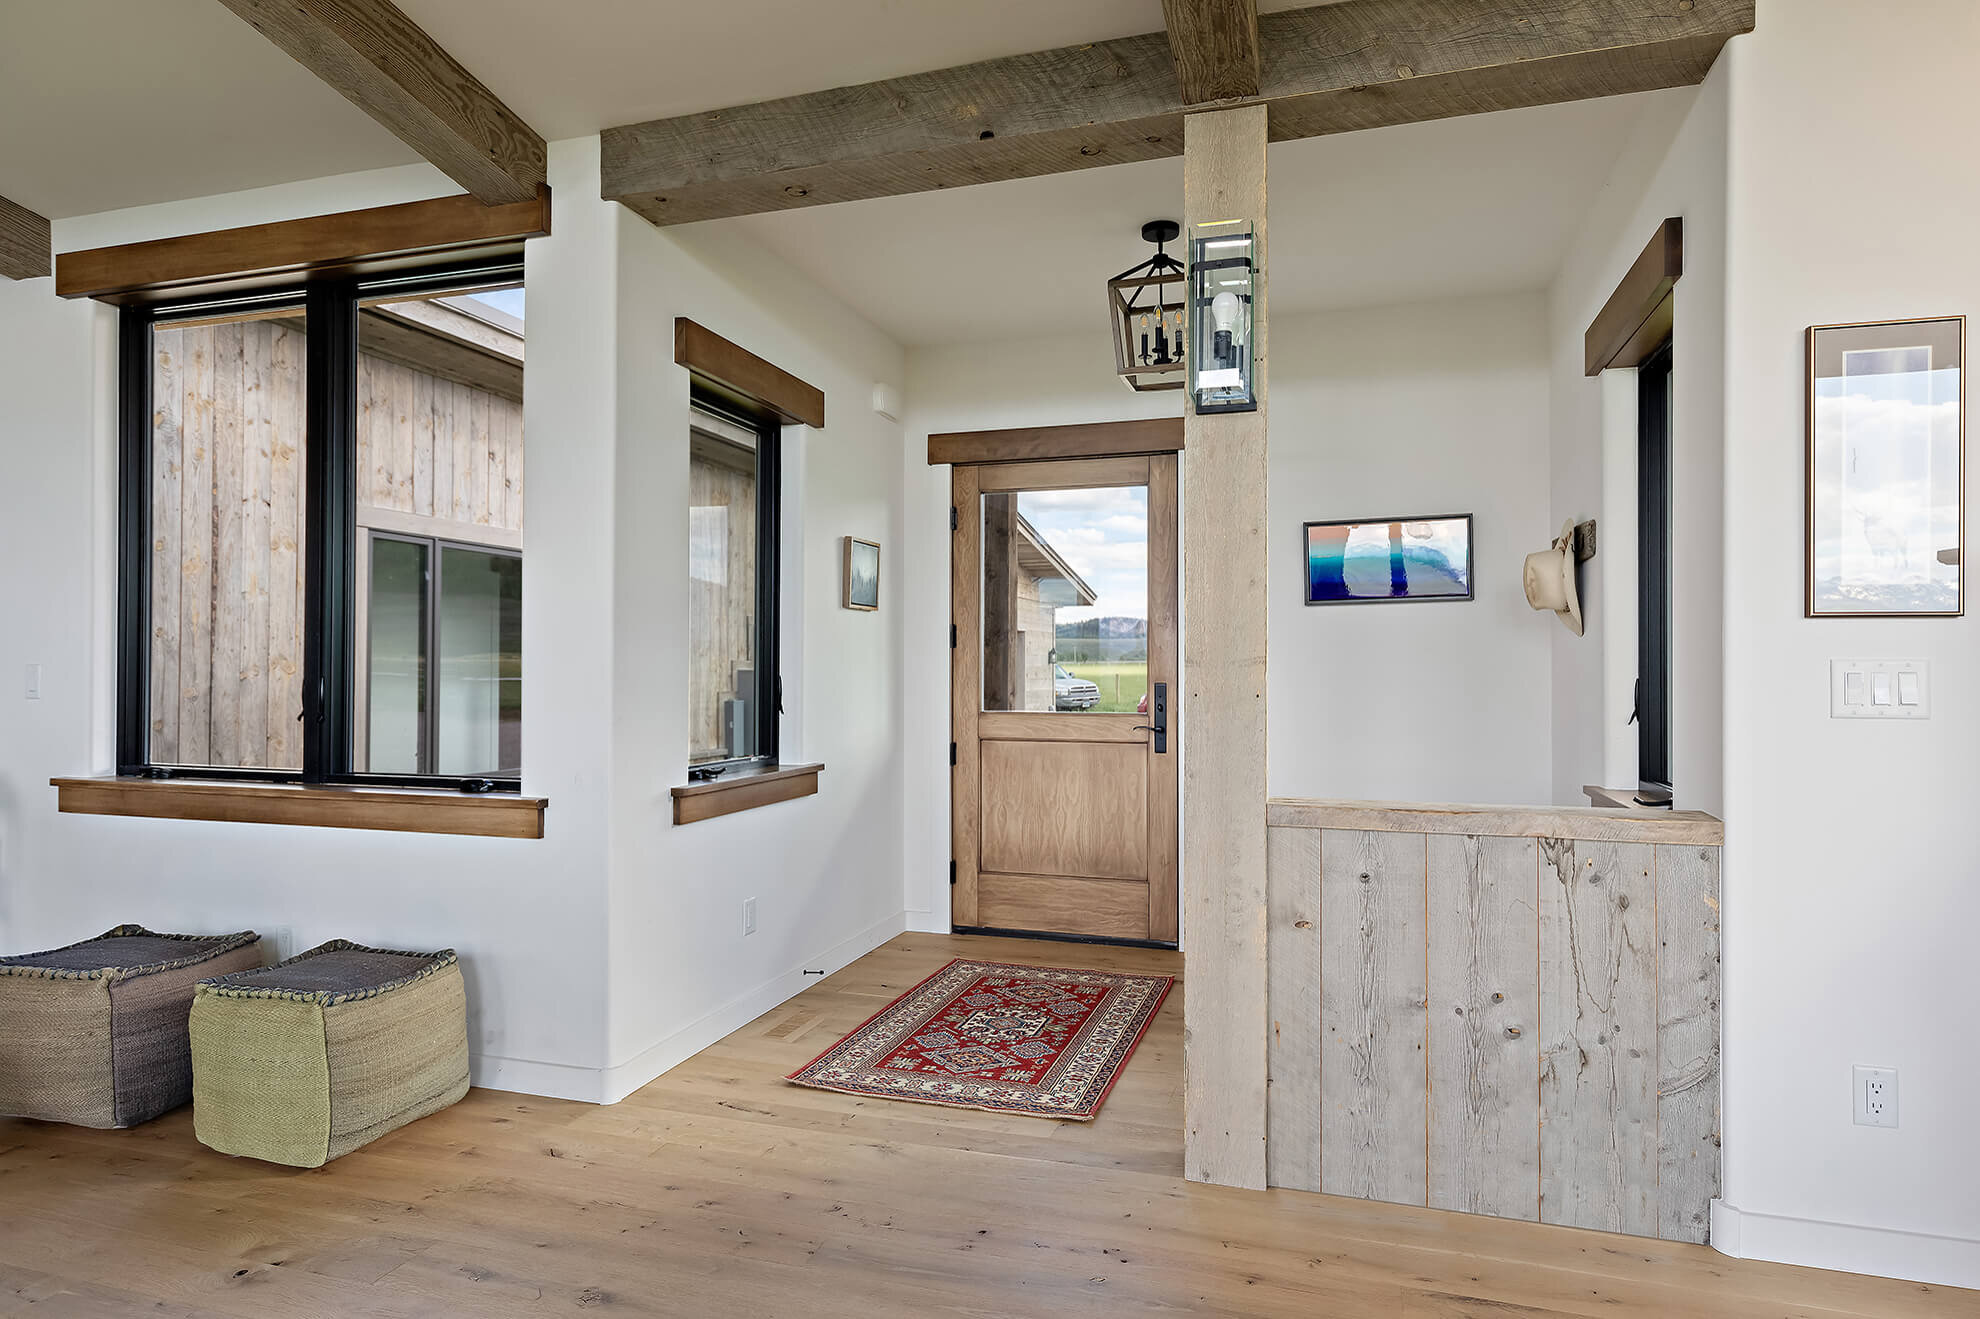 Entryway with white walls and wood beams